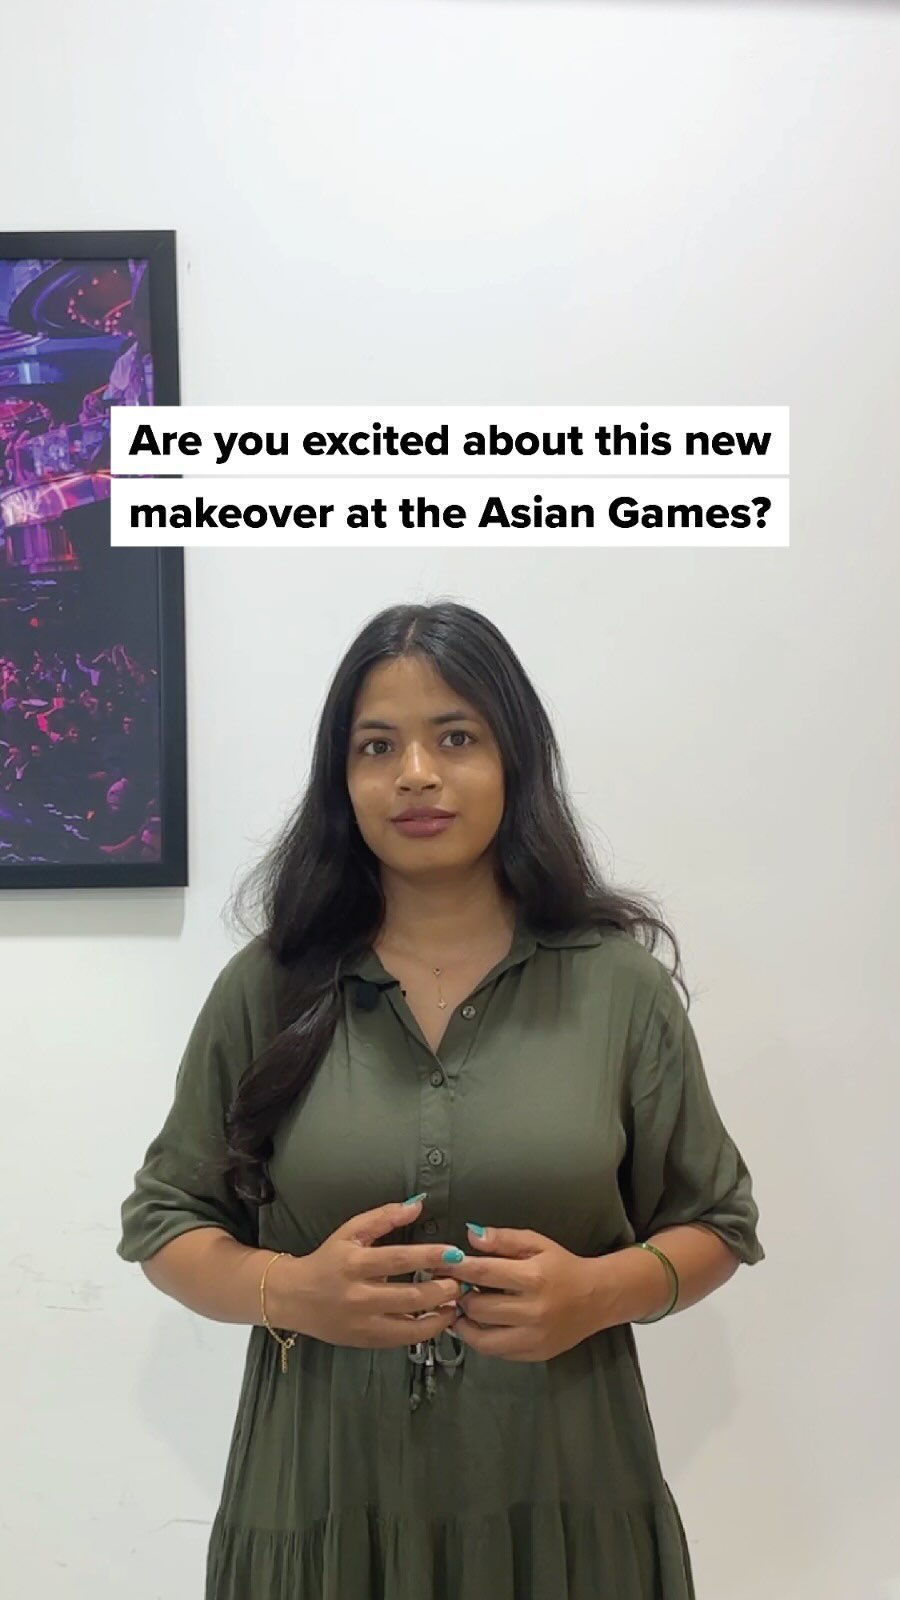 Get ready for a historic moment as Asian Games 2023 gets Digital Upgrade. 
The 19th Asian Games is going digital with the help of Alibaba Cloud Technologies. And there’s more – Esports, where elite video gamers compete, is now an official medal event. Are you excited about these changes? Share your thoughts and tell us which sport you’re cheering for!

#AsianGames2023 #DigitalUpgrade #AlibabaCloud #EsportsDebut #GameOn #SportsRevolution #MedalEvent #DigitalTransformation #AsianGamesExcitement #FutureOfSports #CloudTechnology #GameChanger #AthletesUnite #CompetitionTime #Gaming